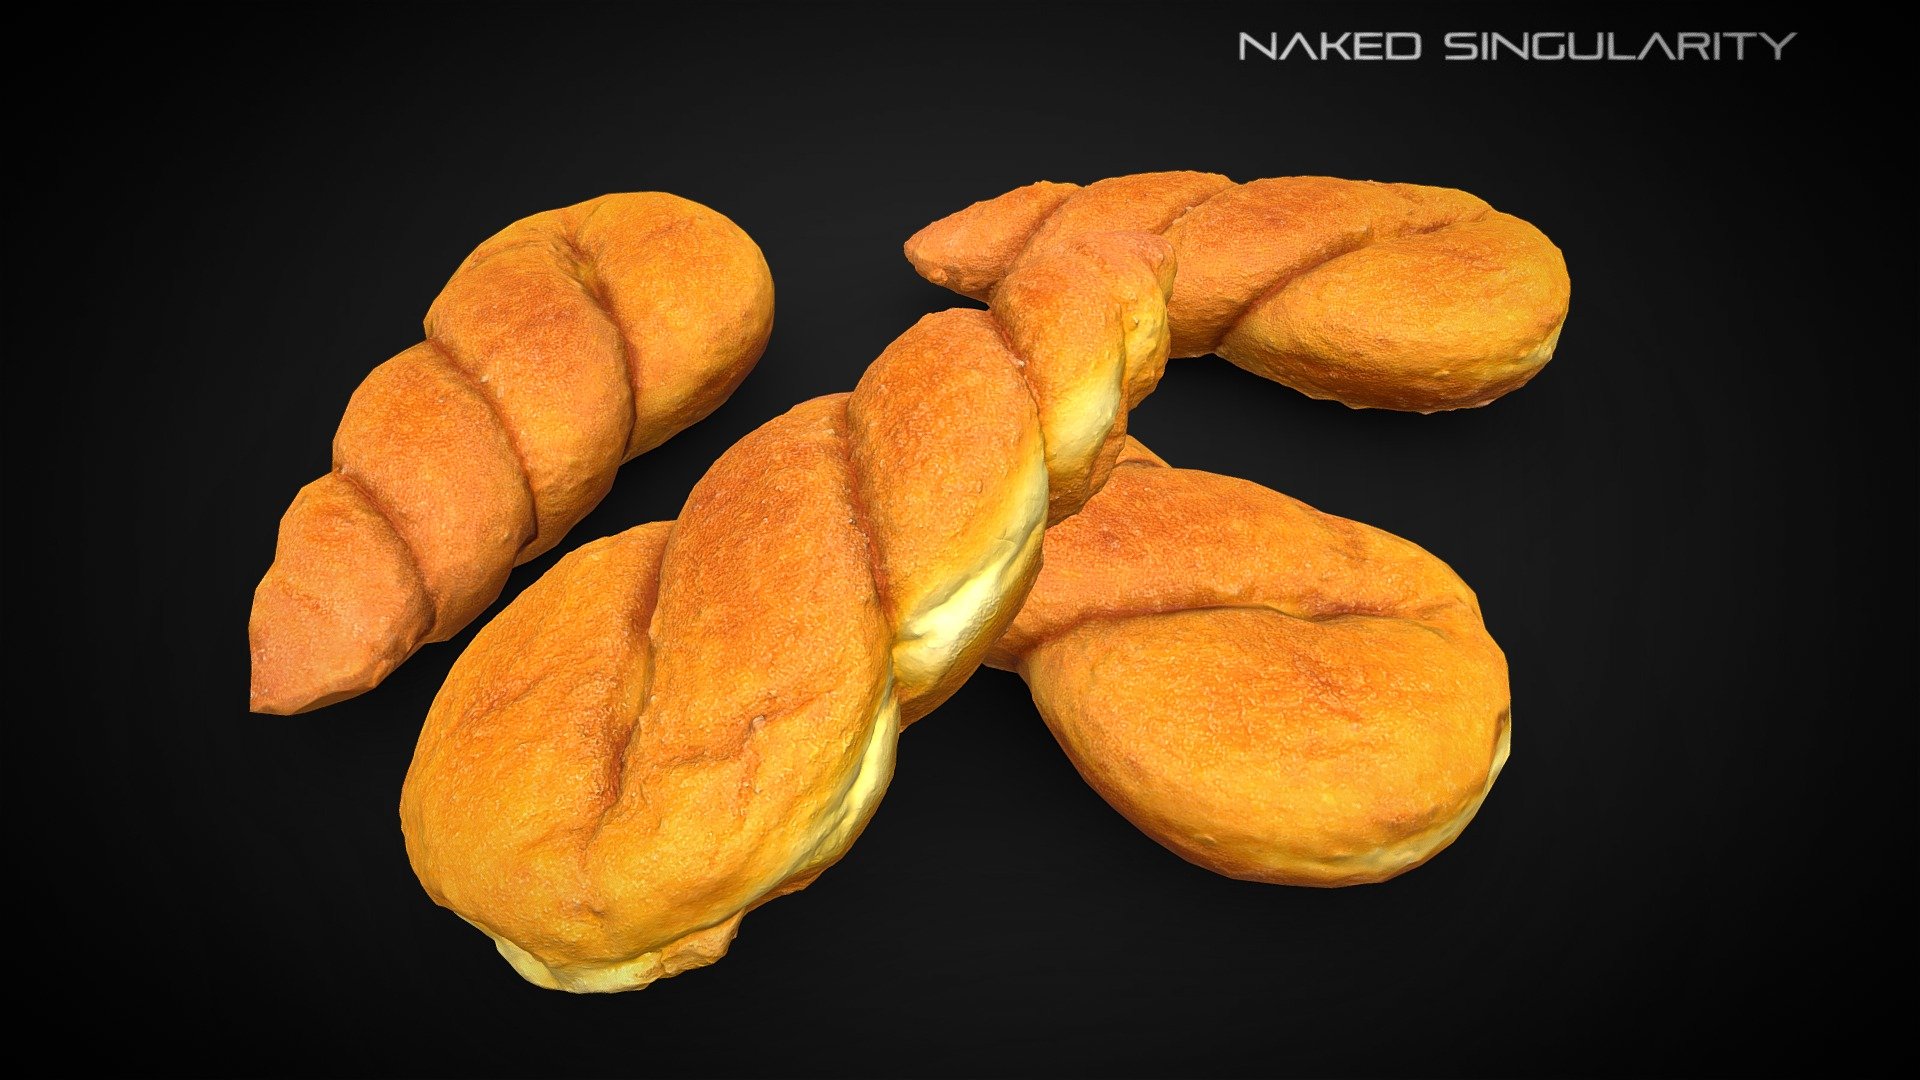 3D Scan bakery - Twisted Donut photogrammetry 4K


High quality 3d scan / photogrammetry of a twisted donut.
Include low poly and high poly versions. Use &ldquo;Annotation